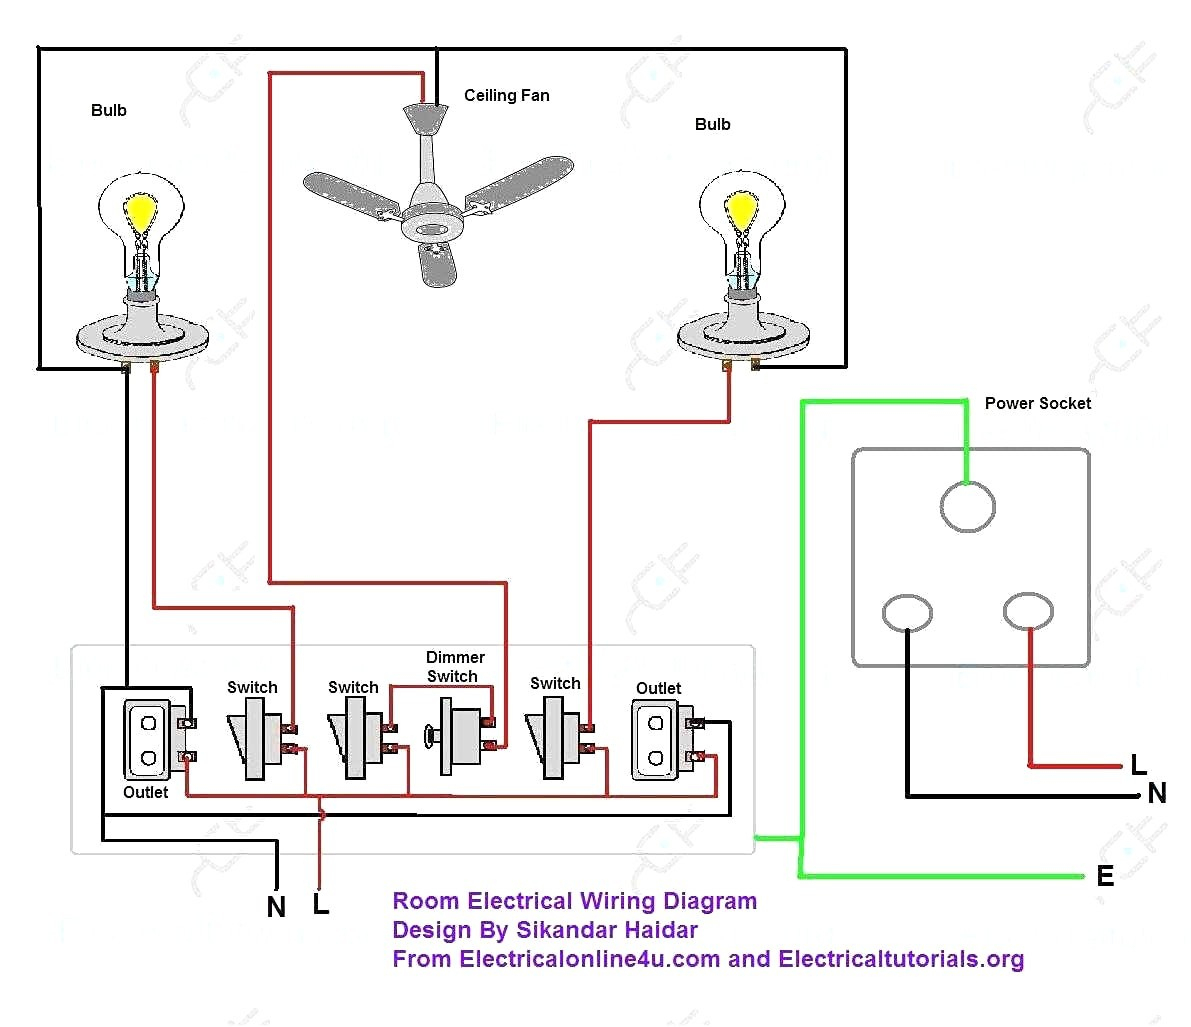 Basic Outlet Wiring - Wiring Diagrams Hubs - Outlet Wiring Diagram